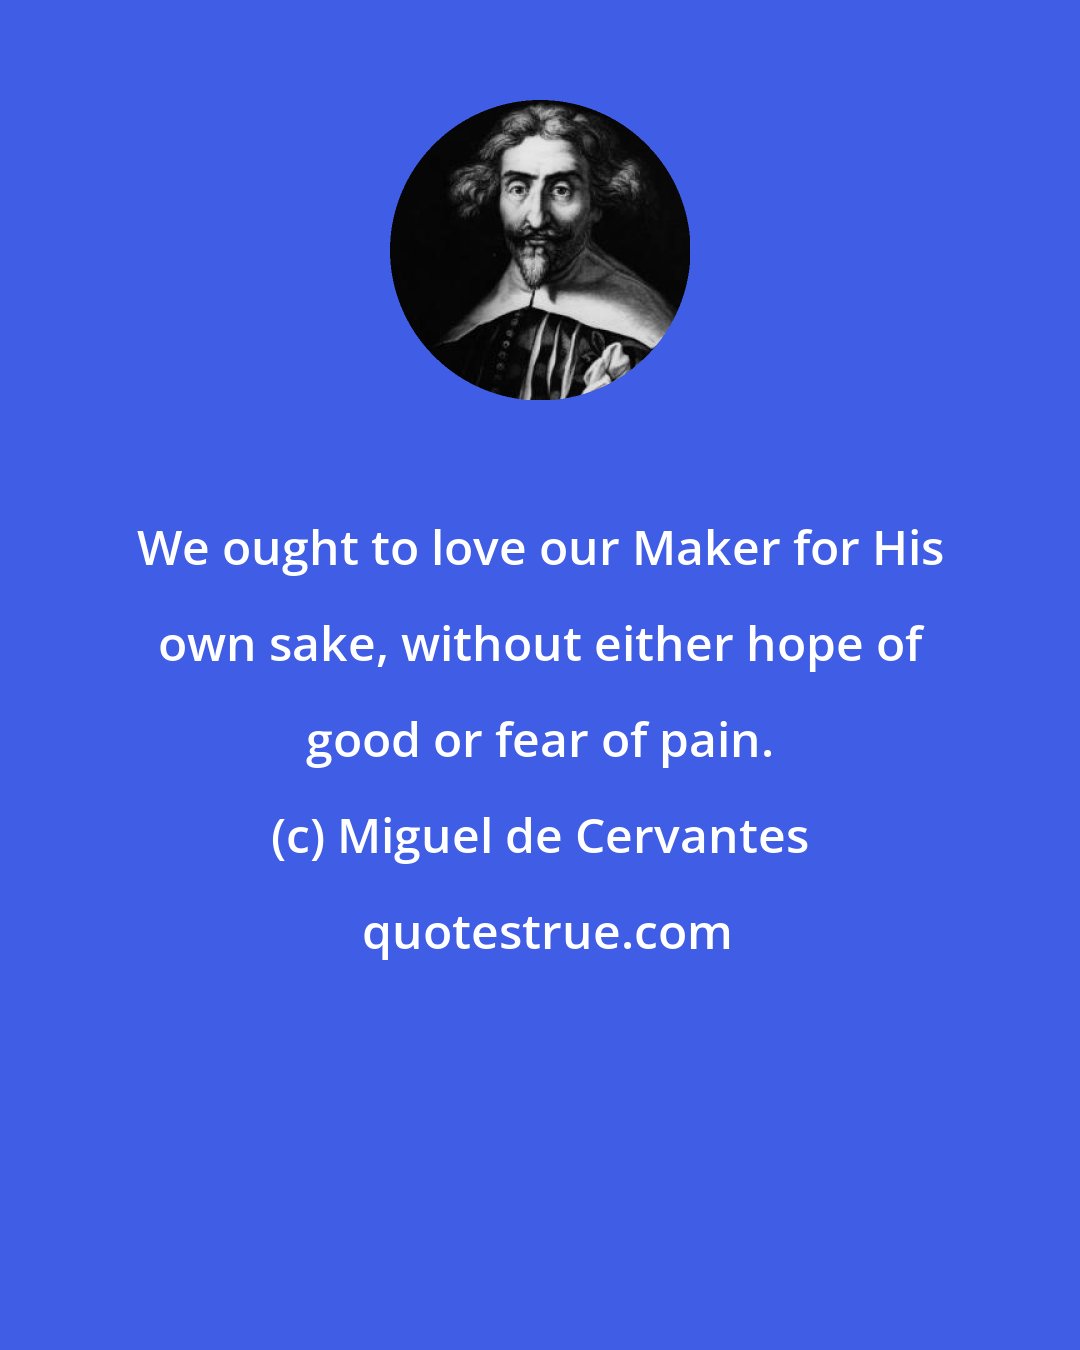 Miguel de Cervantes: We ought to love our Maker for His own sake, without either hope of good or fear of pain.